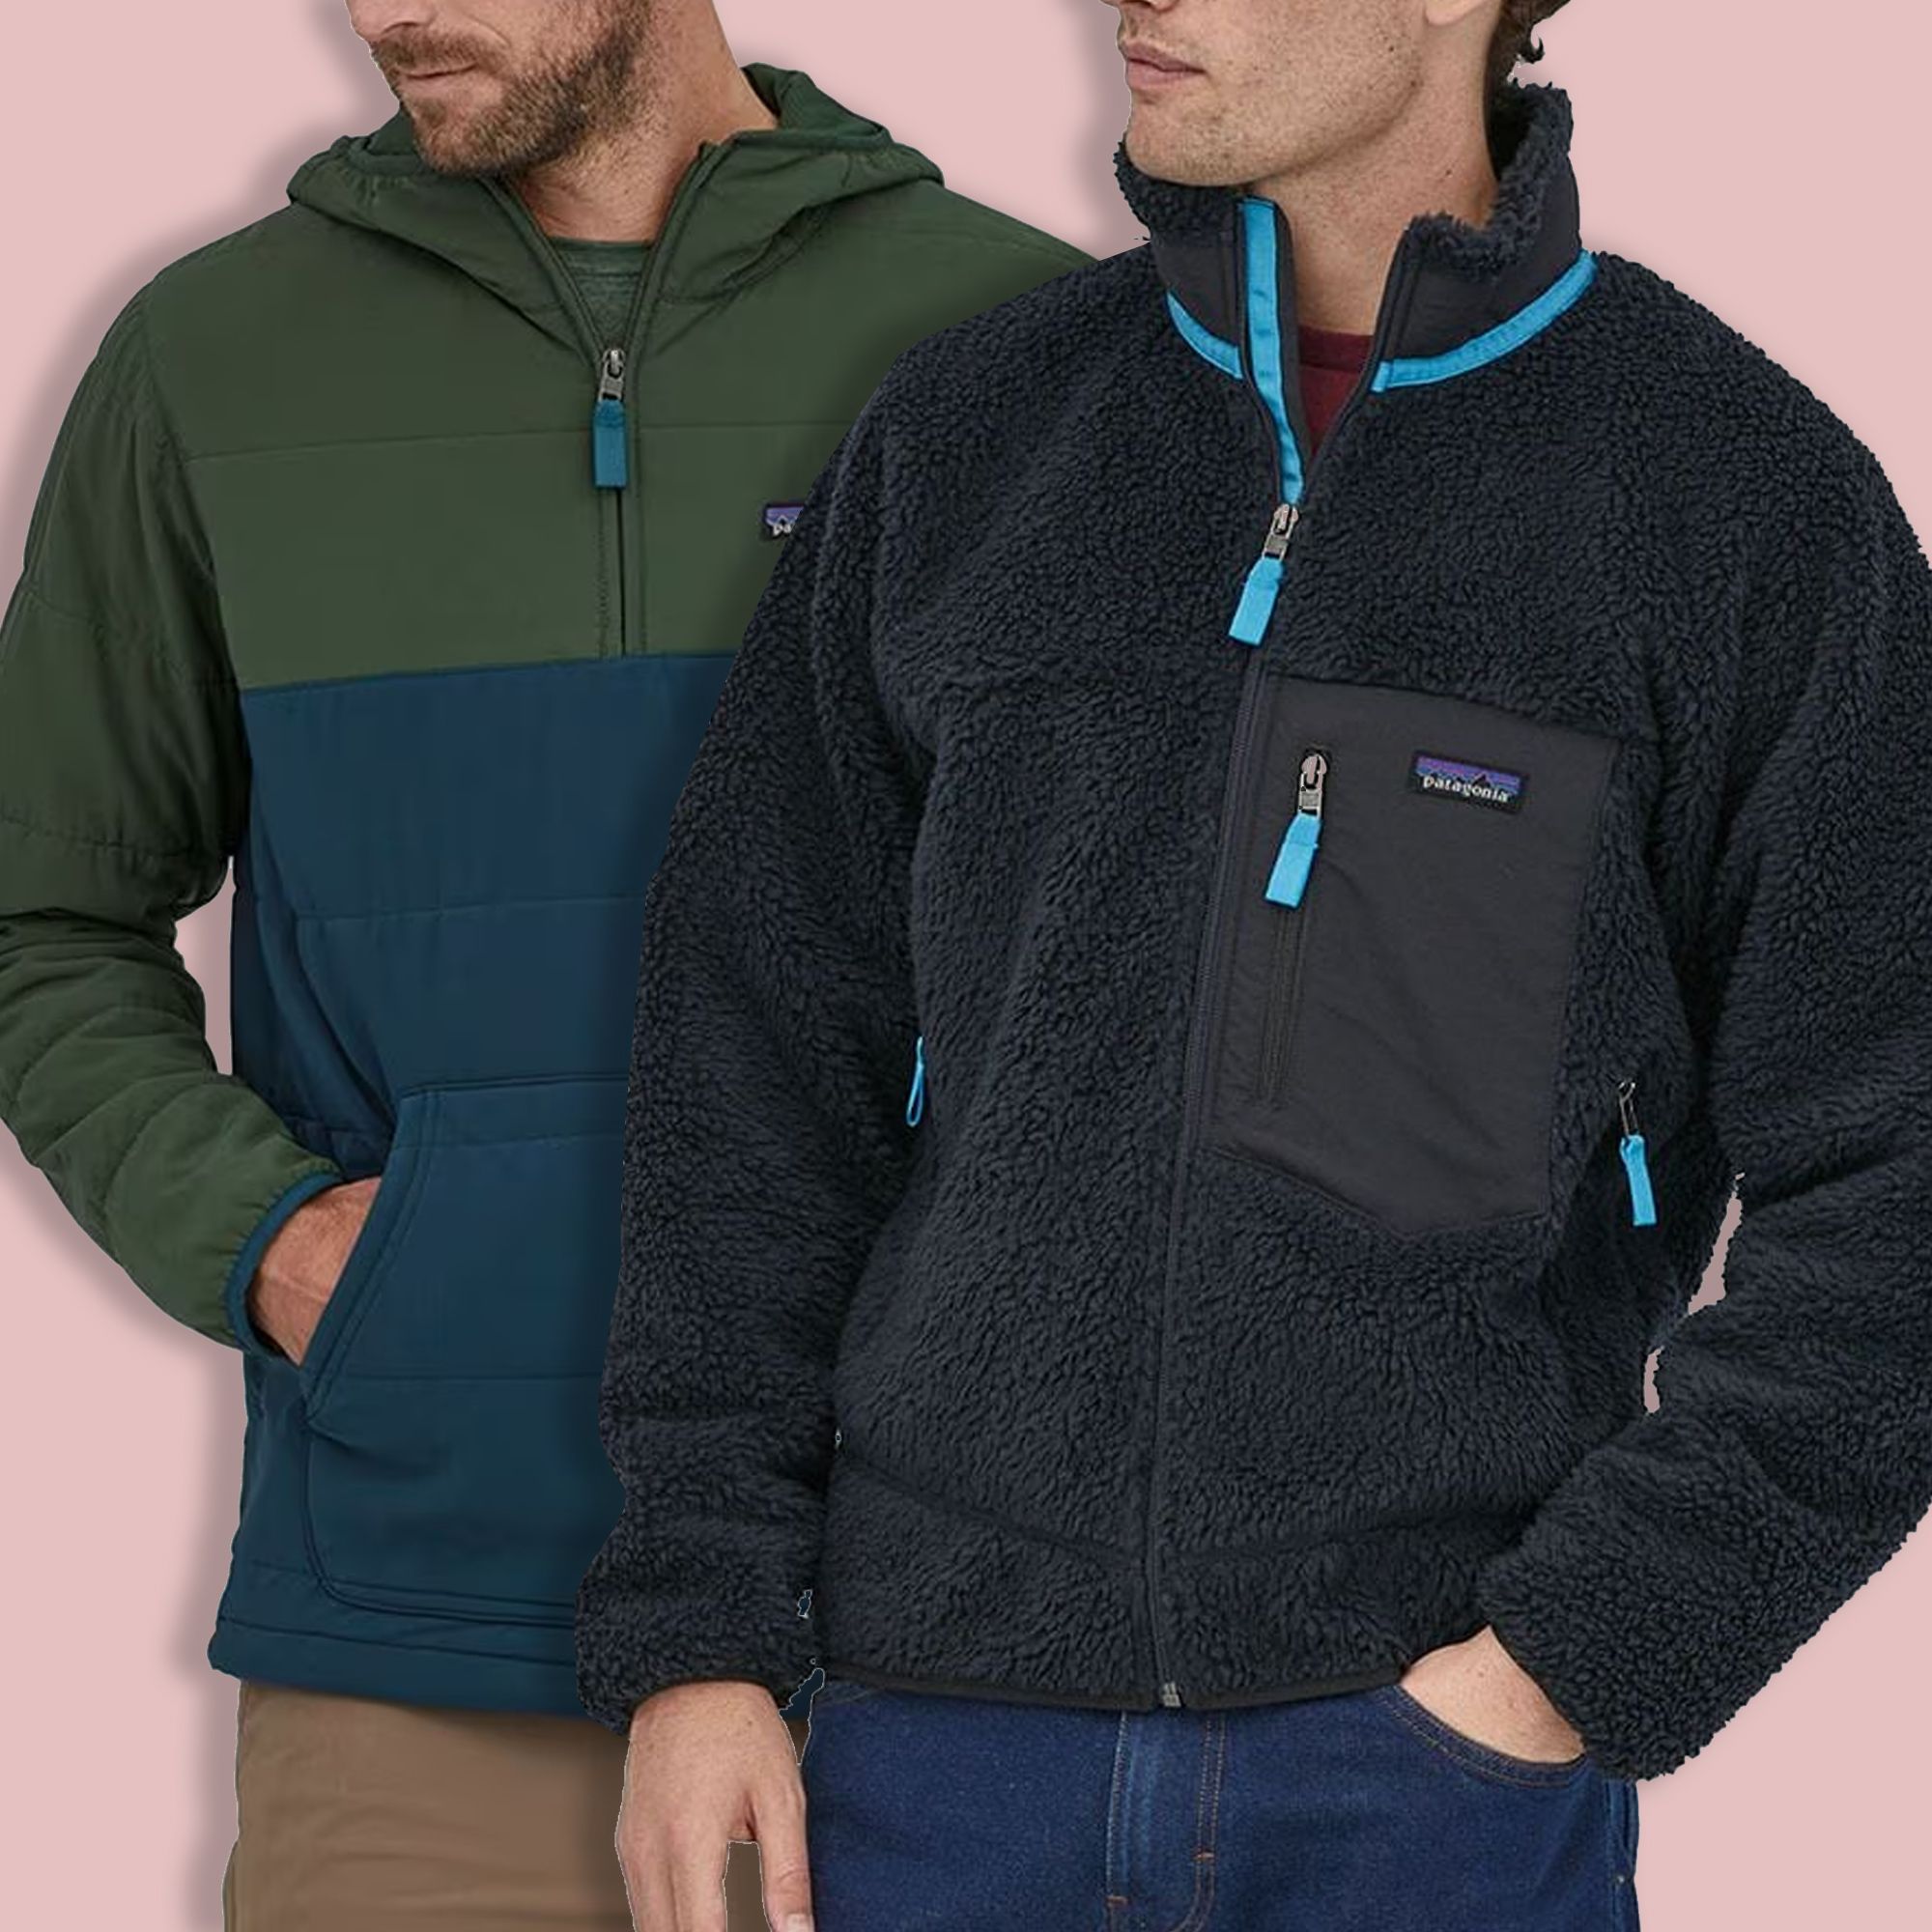 The Best Patagonia Sales to Shop Right Now